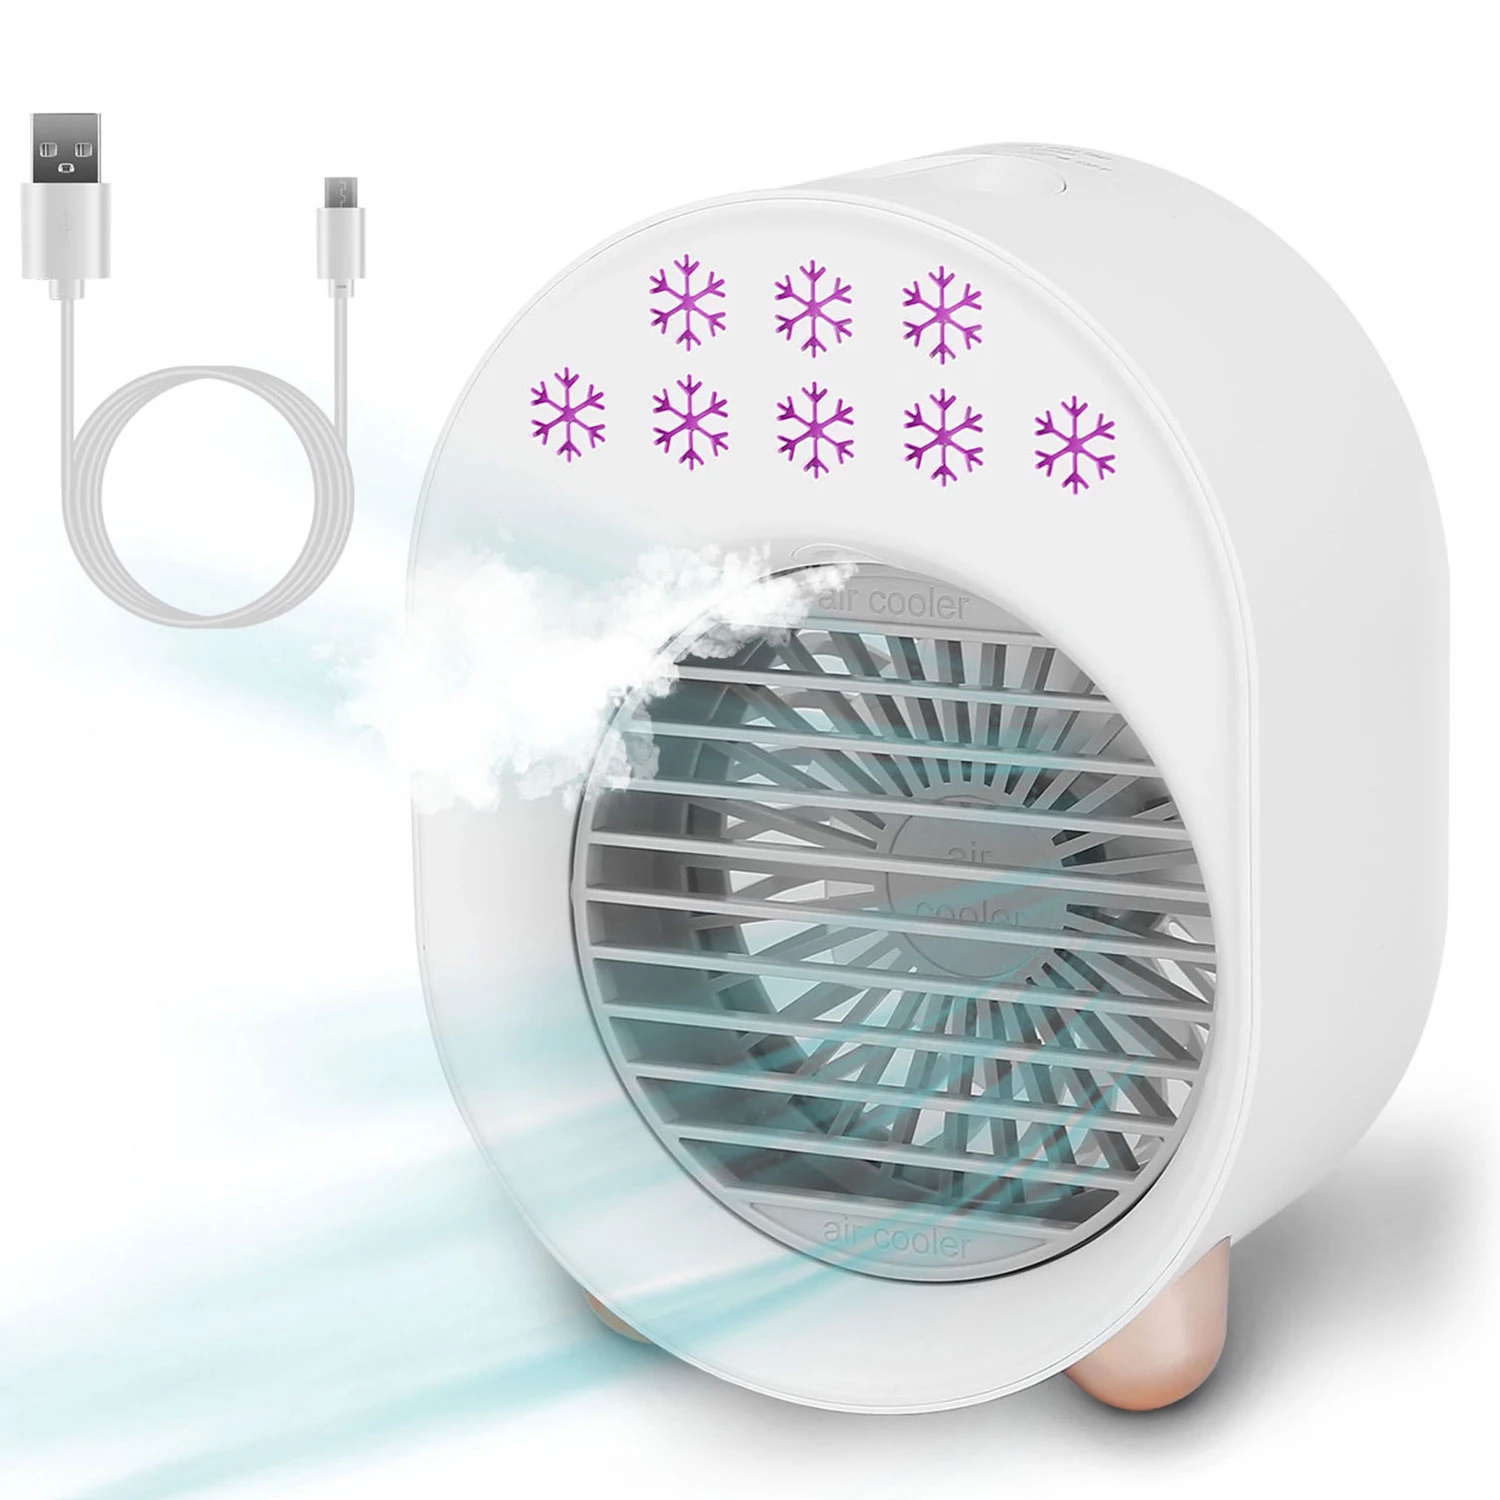 Portable Mini Desktop Air Conditioner Fan - 4-in-1 Cooling Pack, USB Rechargeable, 3 Wind Modes